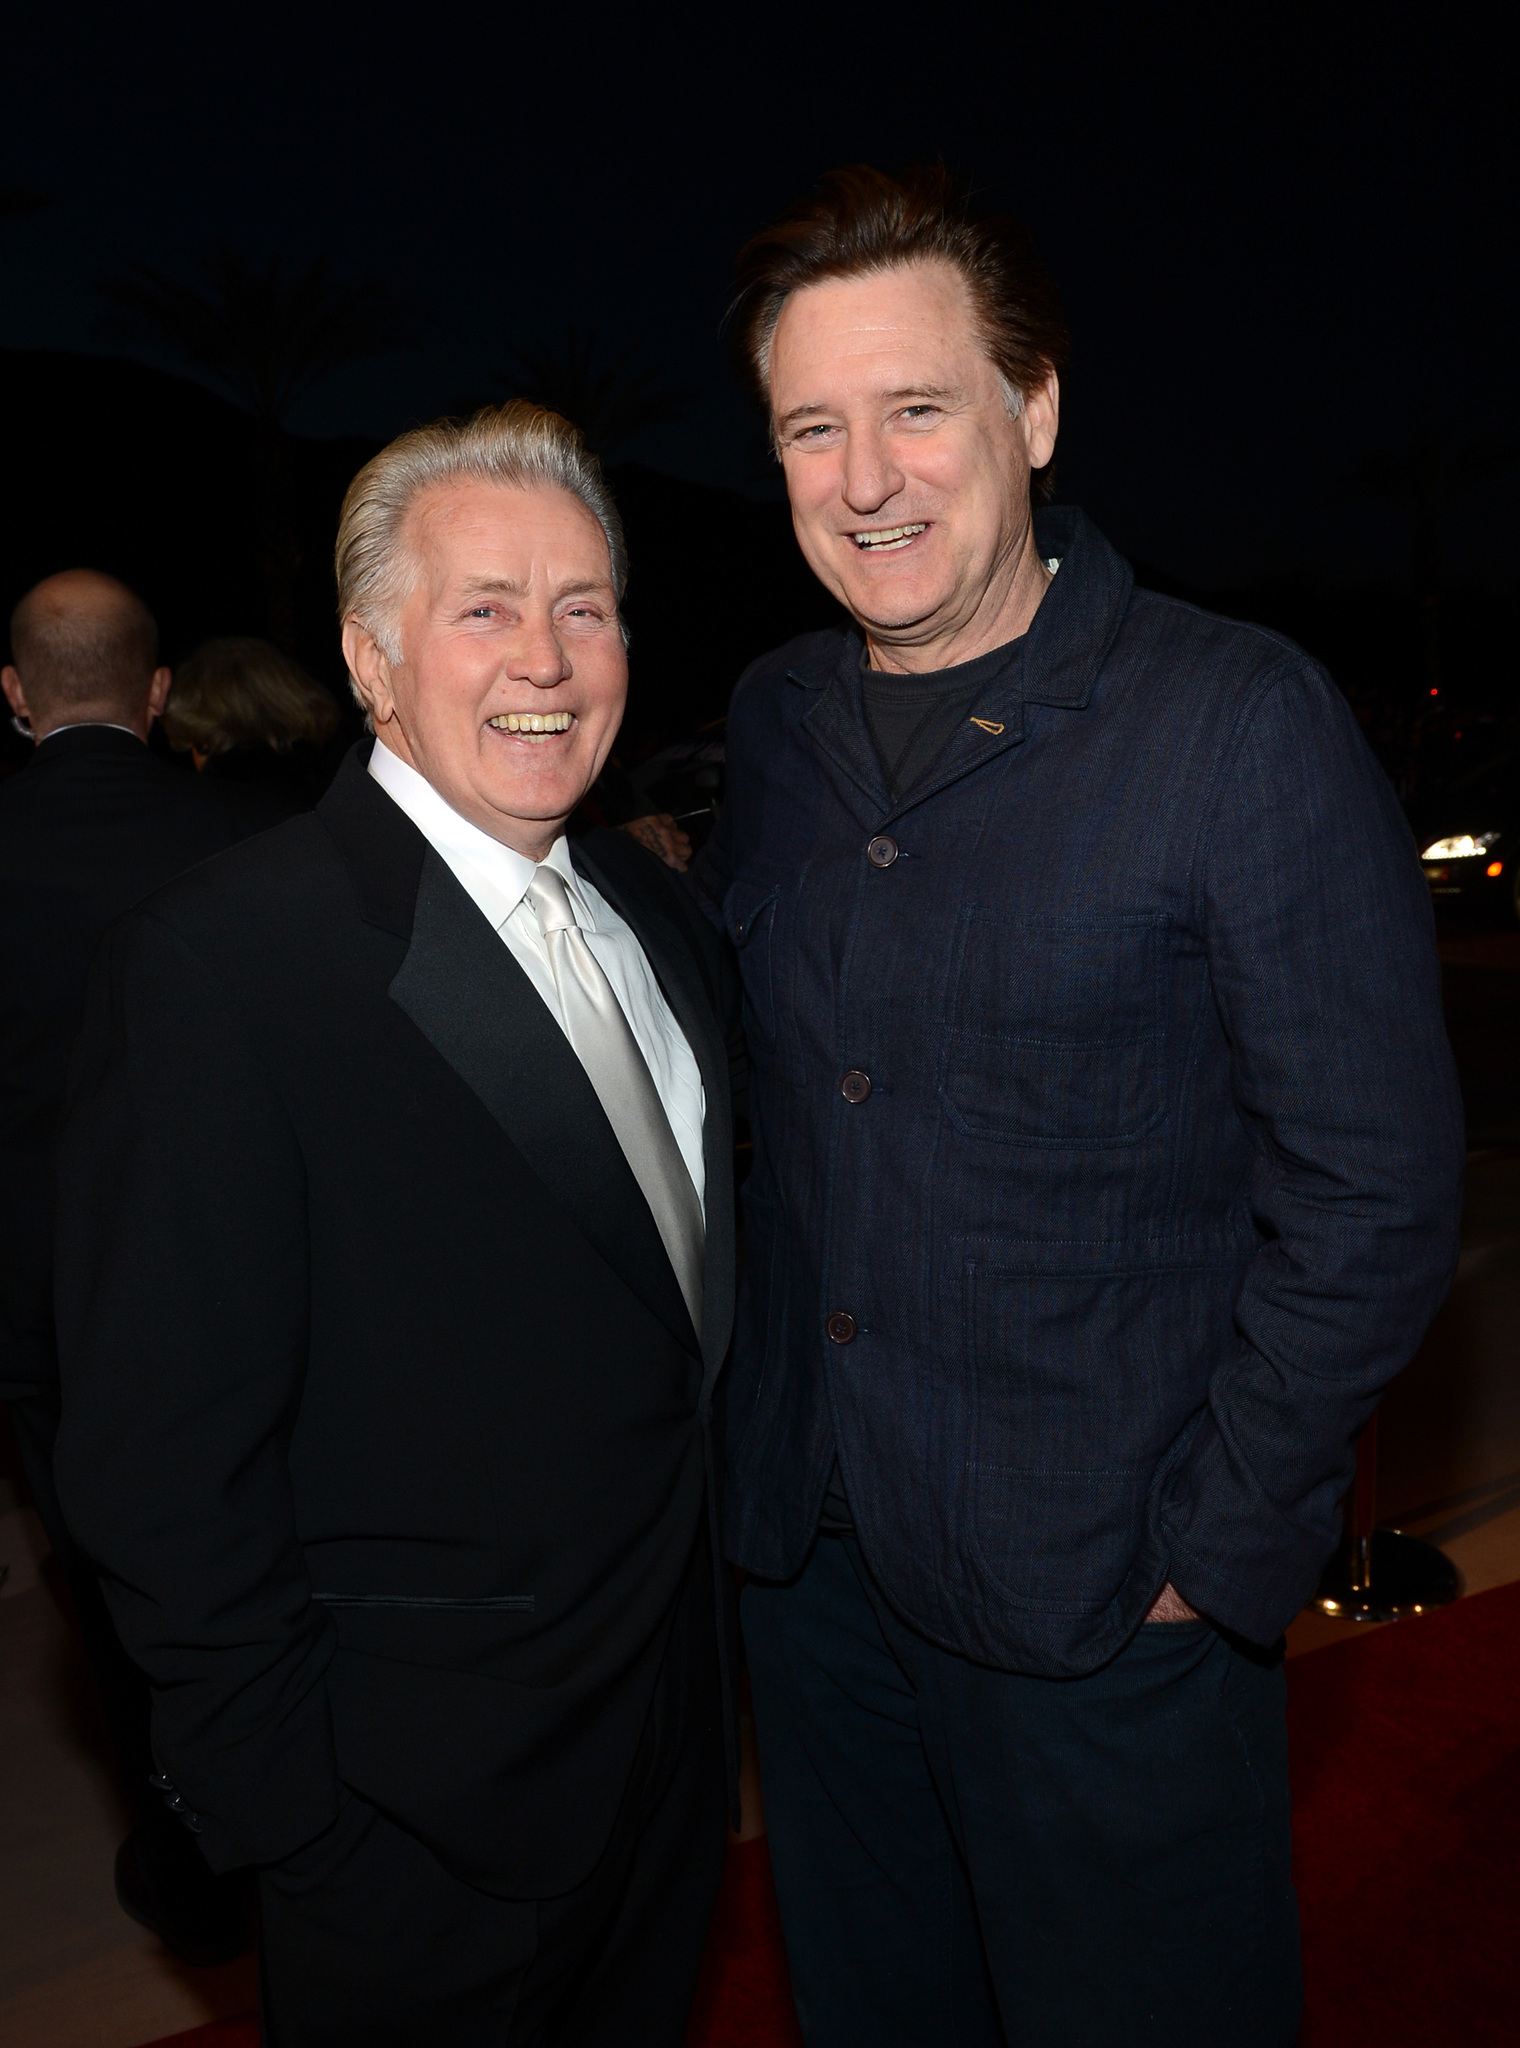 Martin Sheen and Bill Pullman arrive at the 24th annual Palm Springs International Film Festival Awards Gala.